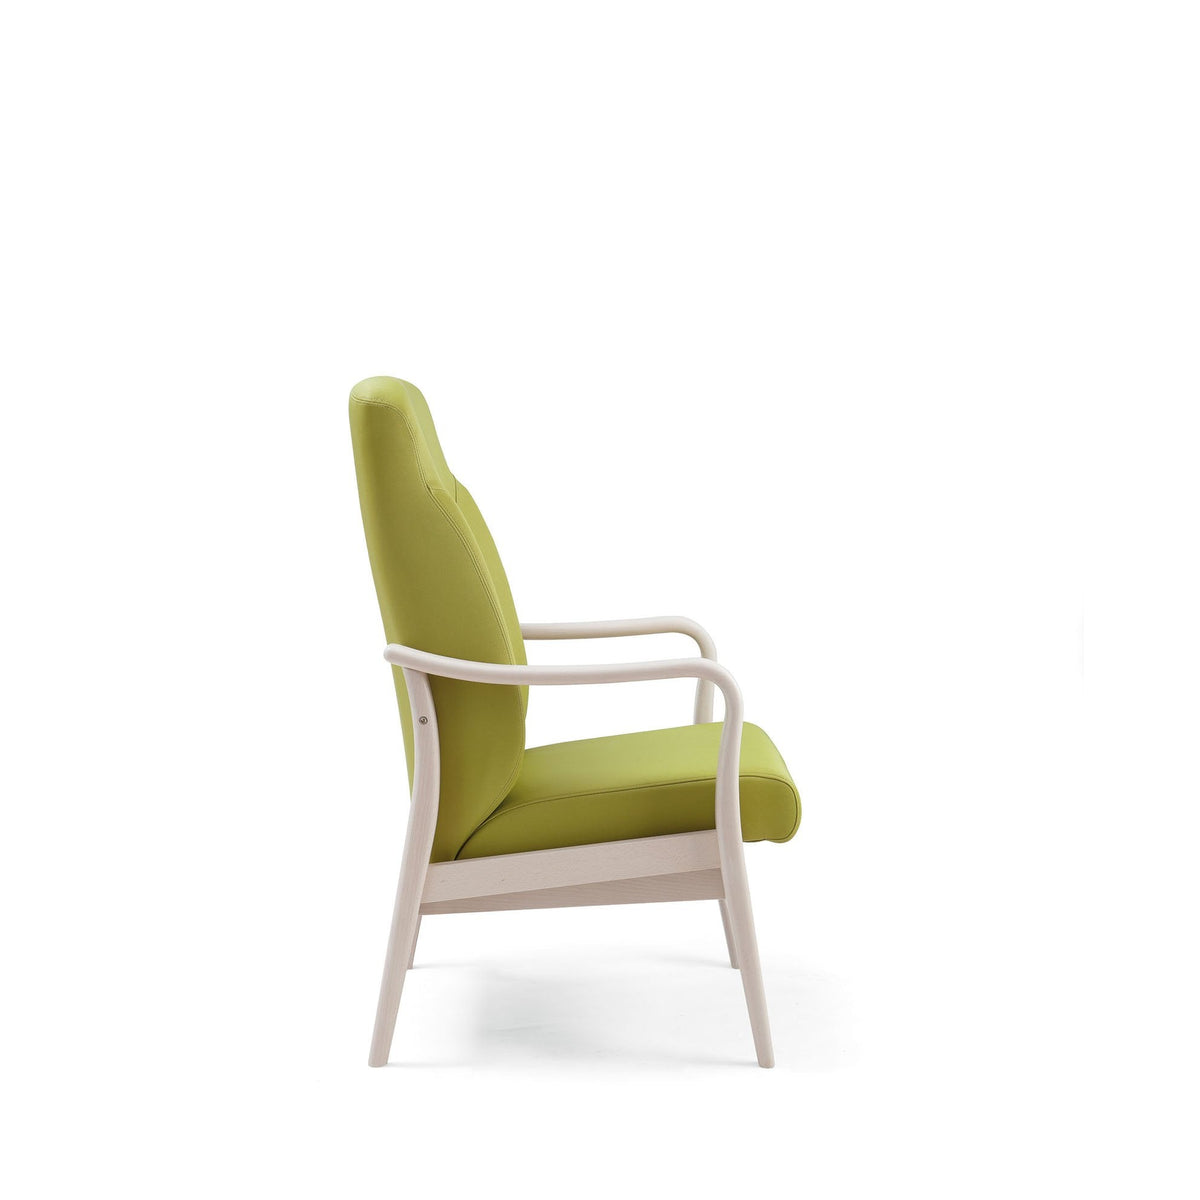 Relax Elegance 16-72/1 Lounge Chair-Piaval-Contract Furniture Store